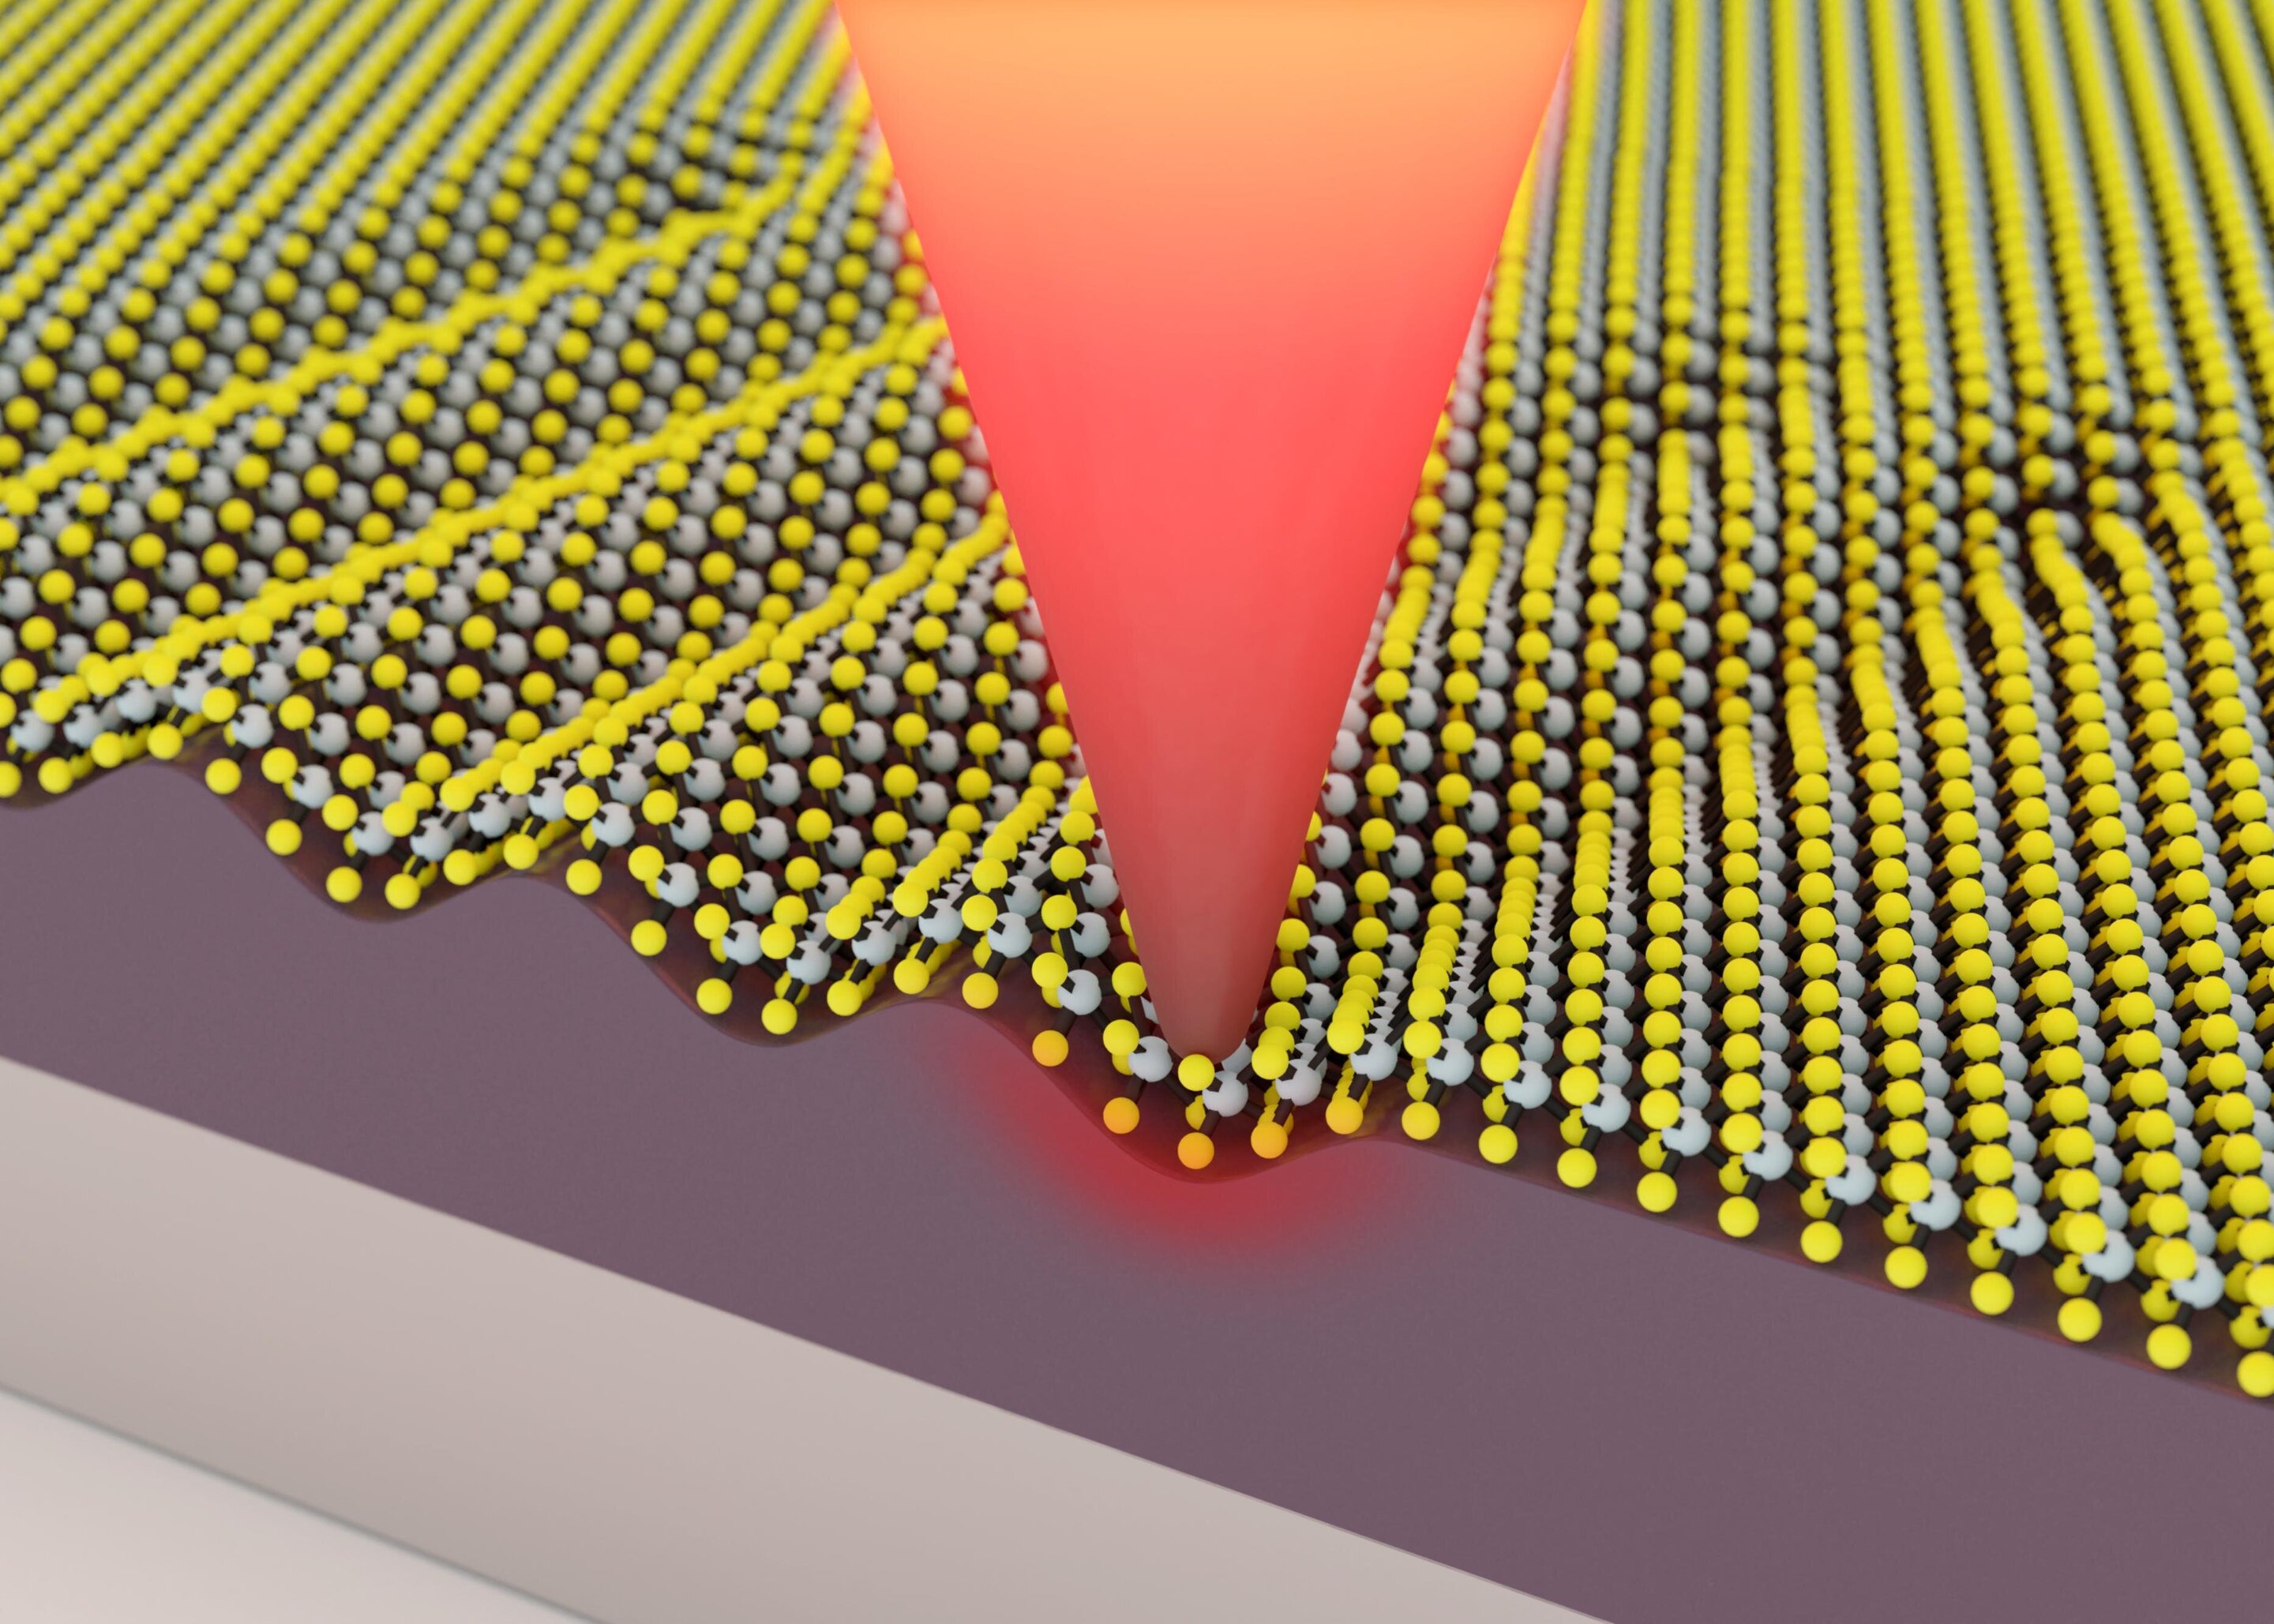 Altering The Properties Of 2-D Materials At The Nanometer Scale | QNewsHub